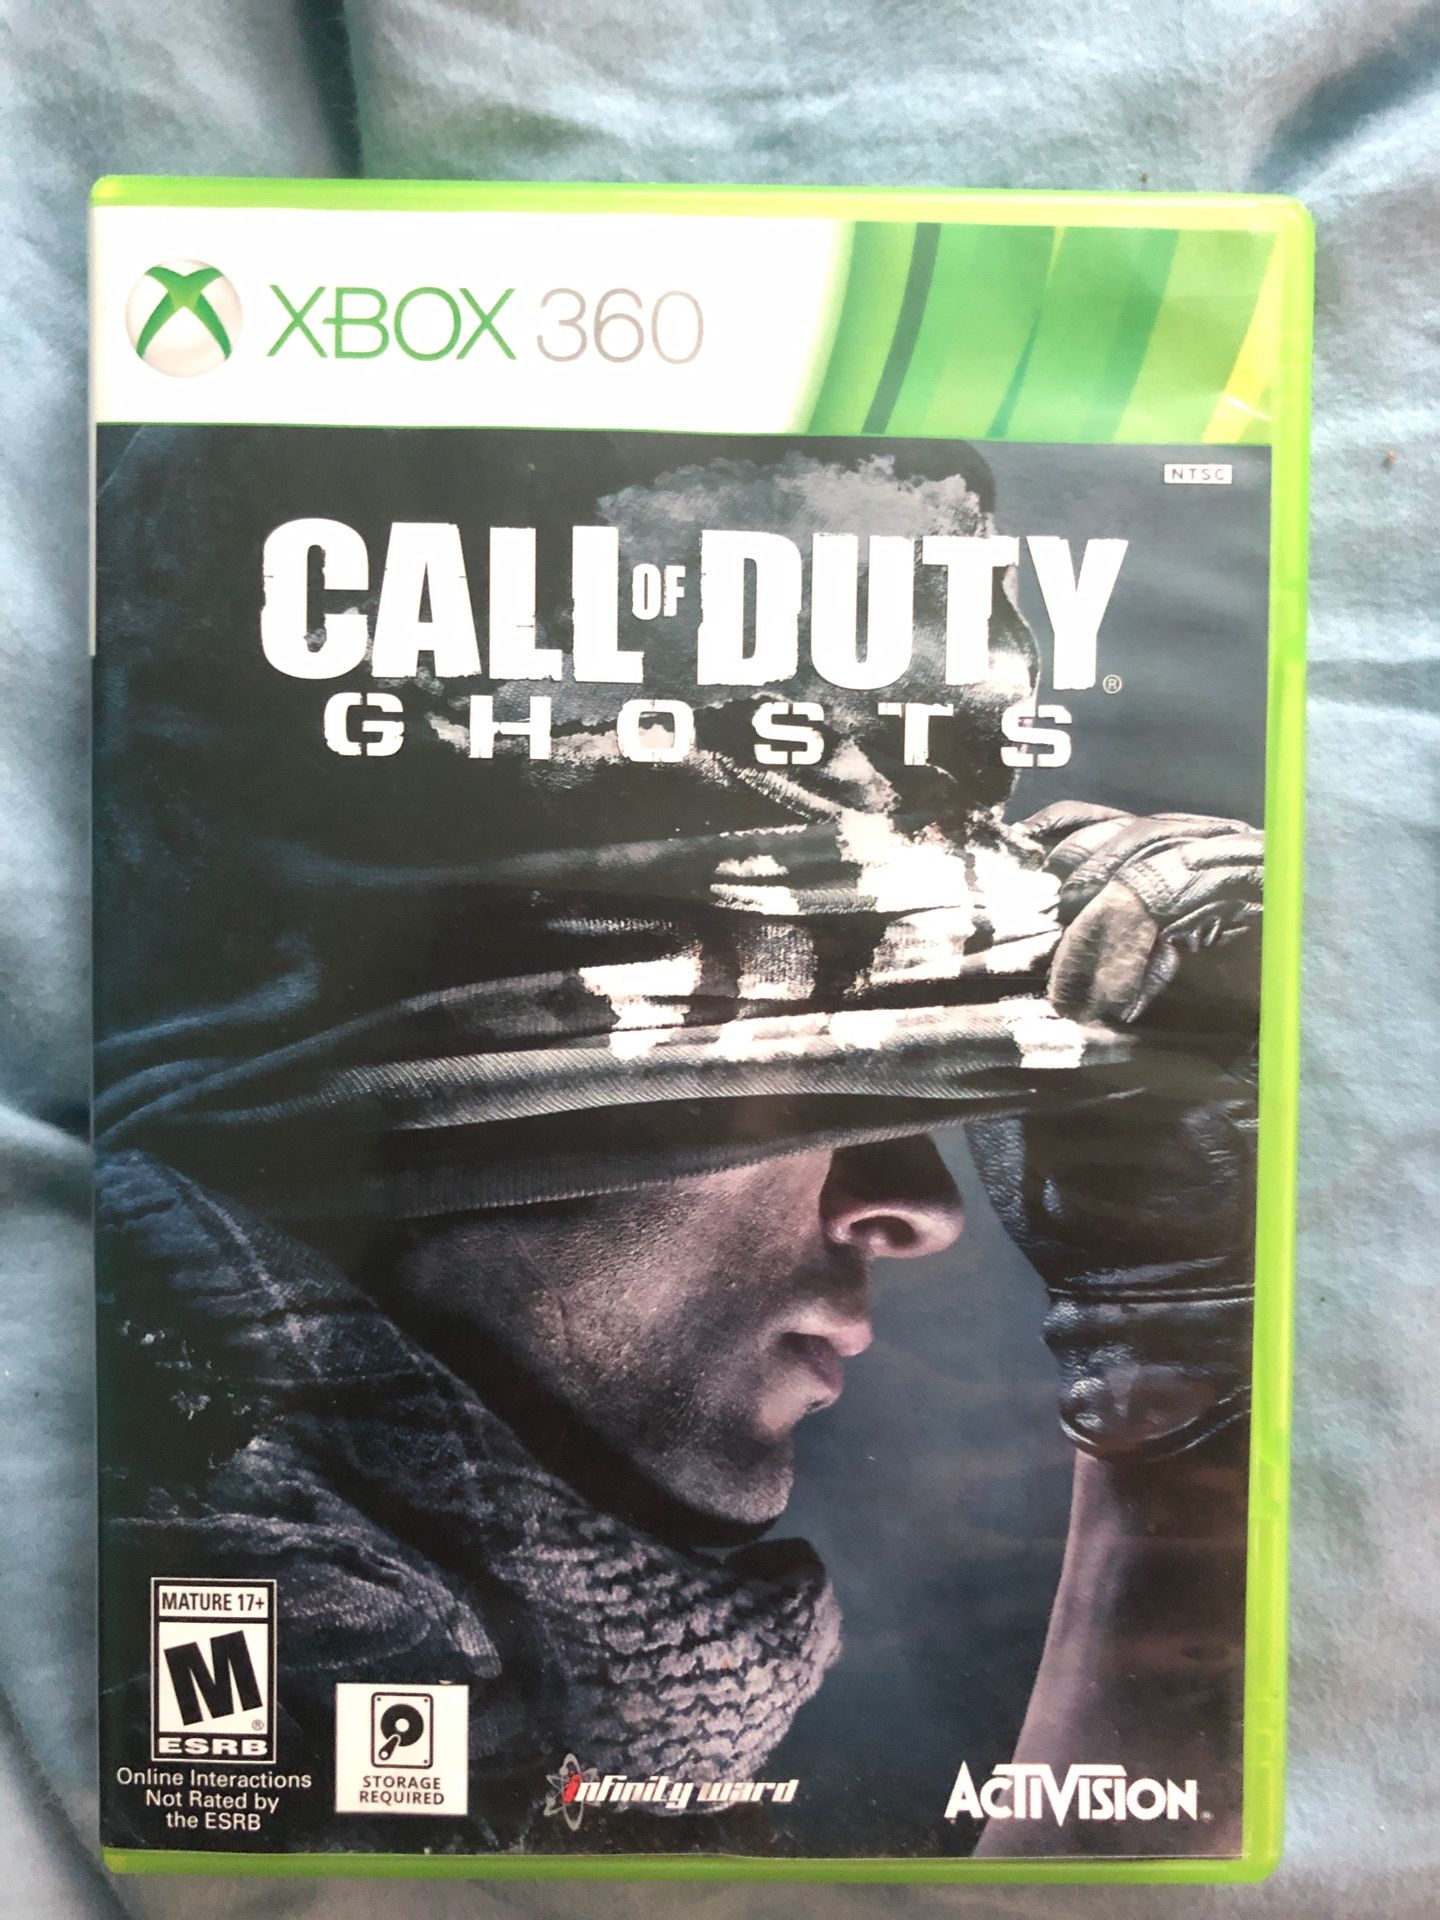 Call of duty ghosts Xbox 360 game